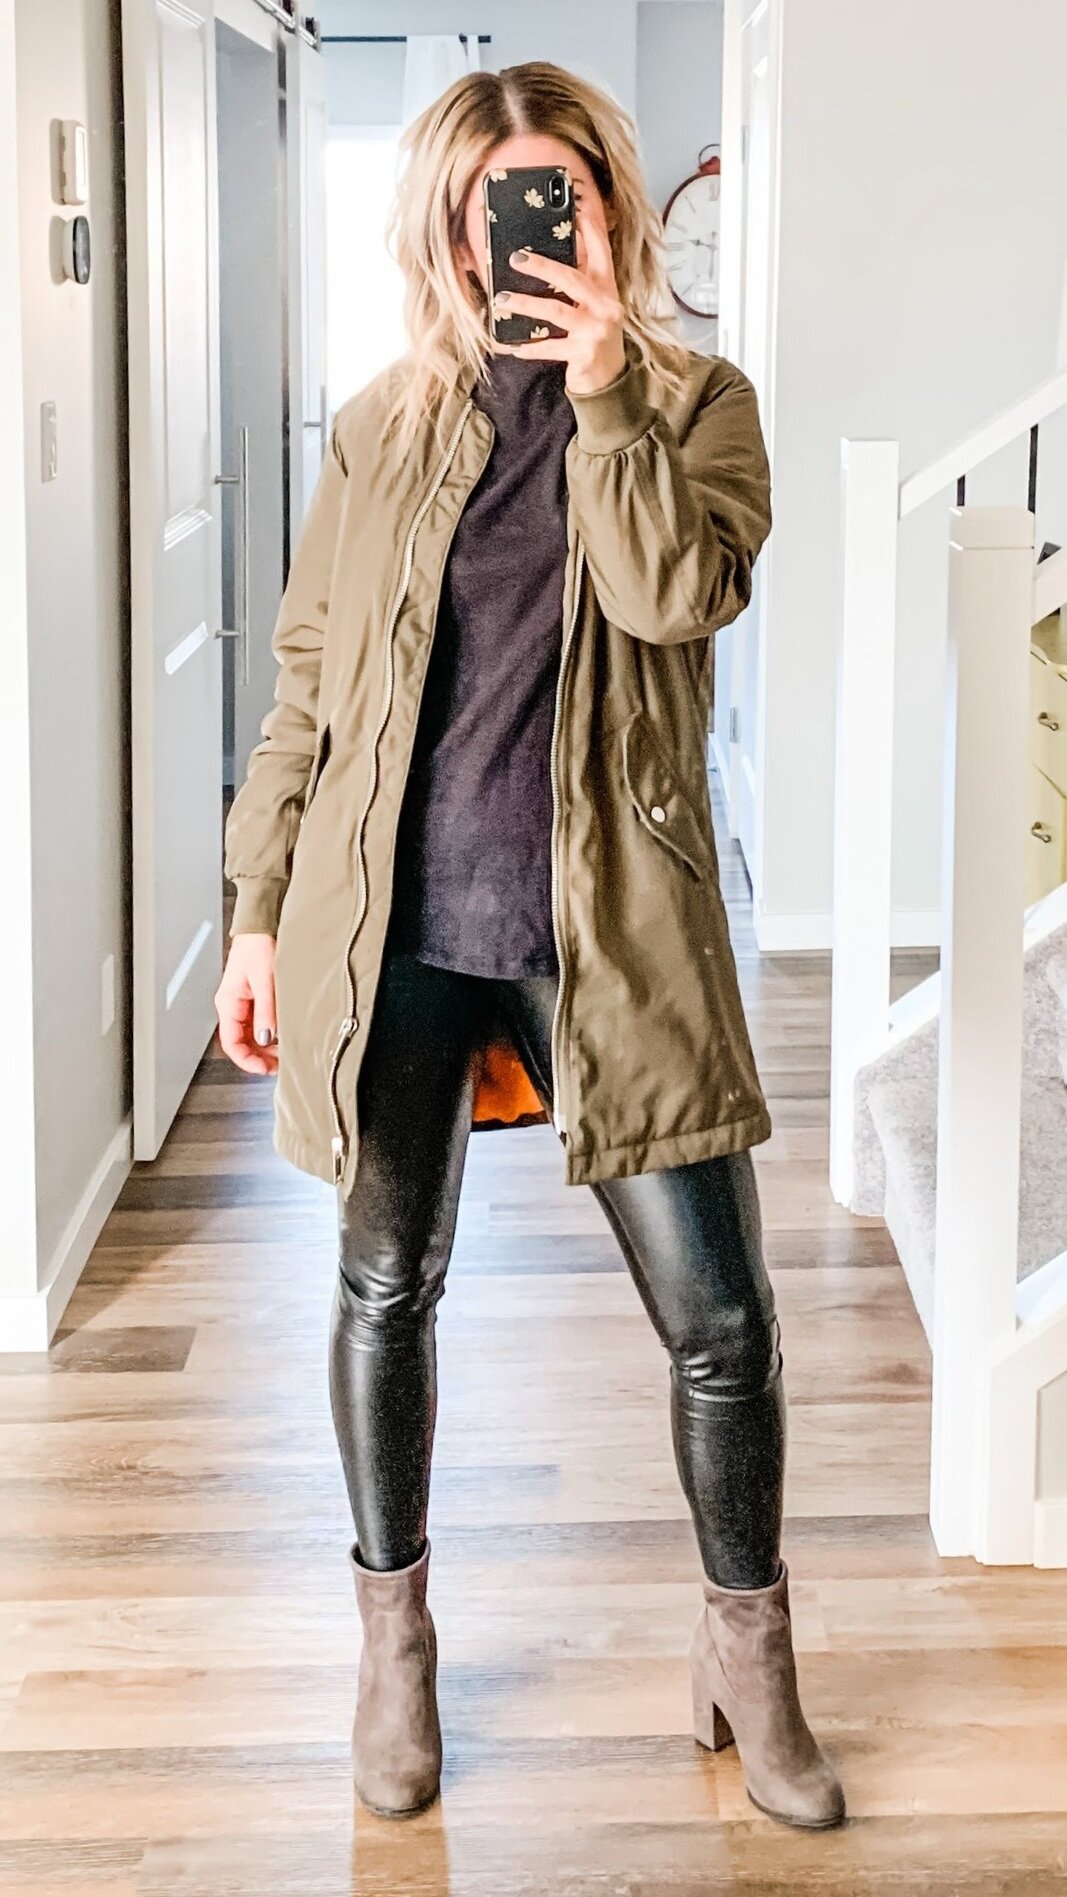 LONG BOMBER JACKET + SUEDE ANKLE BOOTS